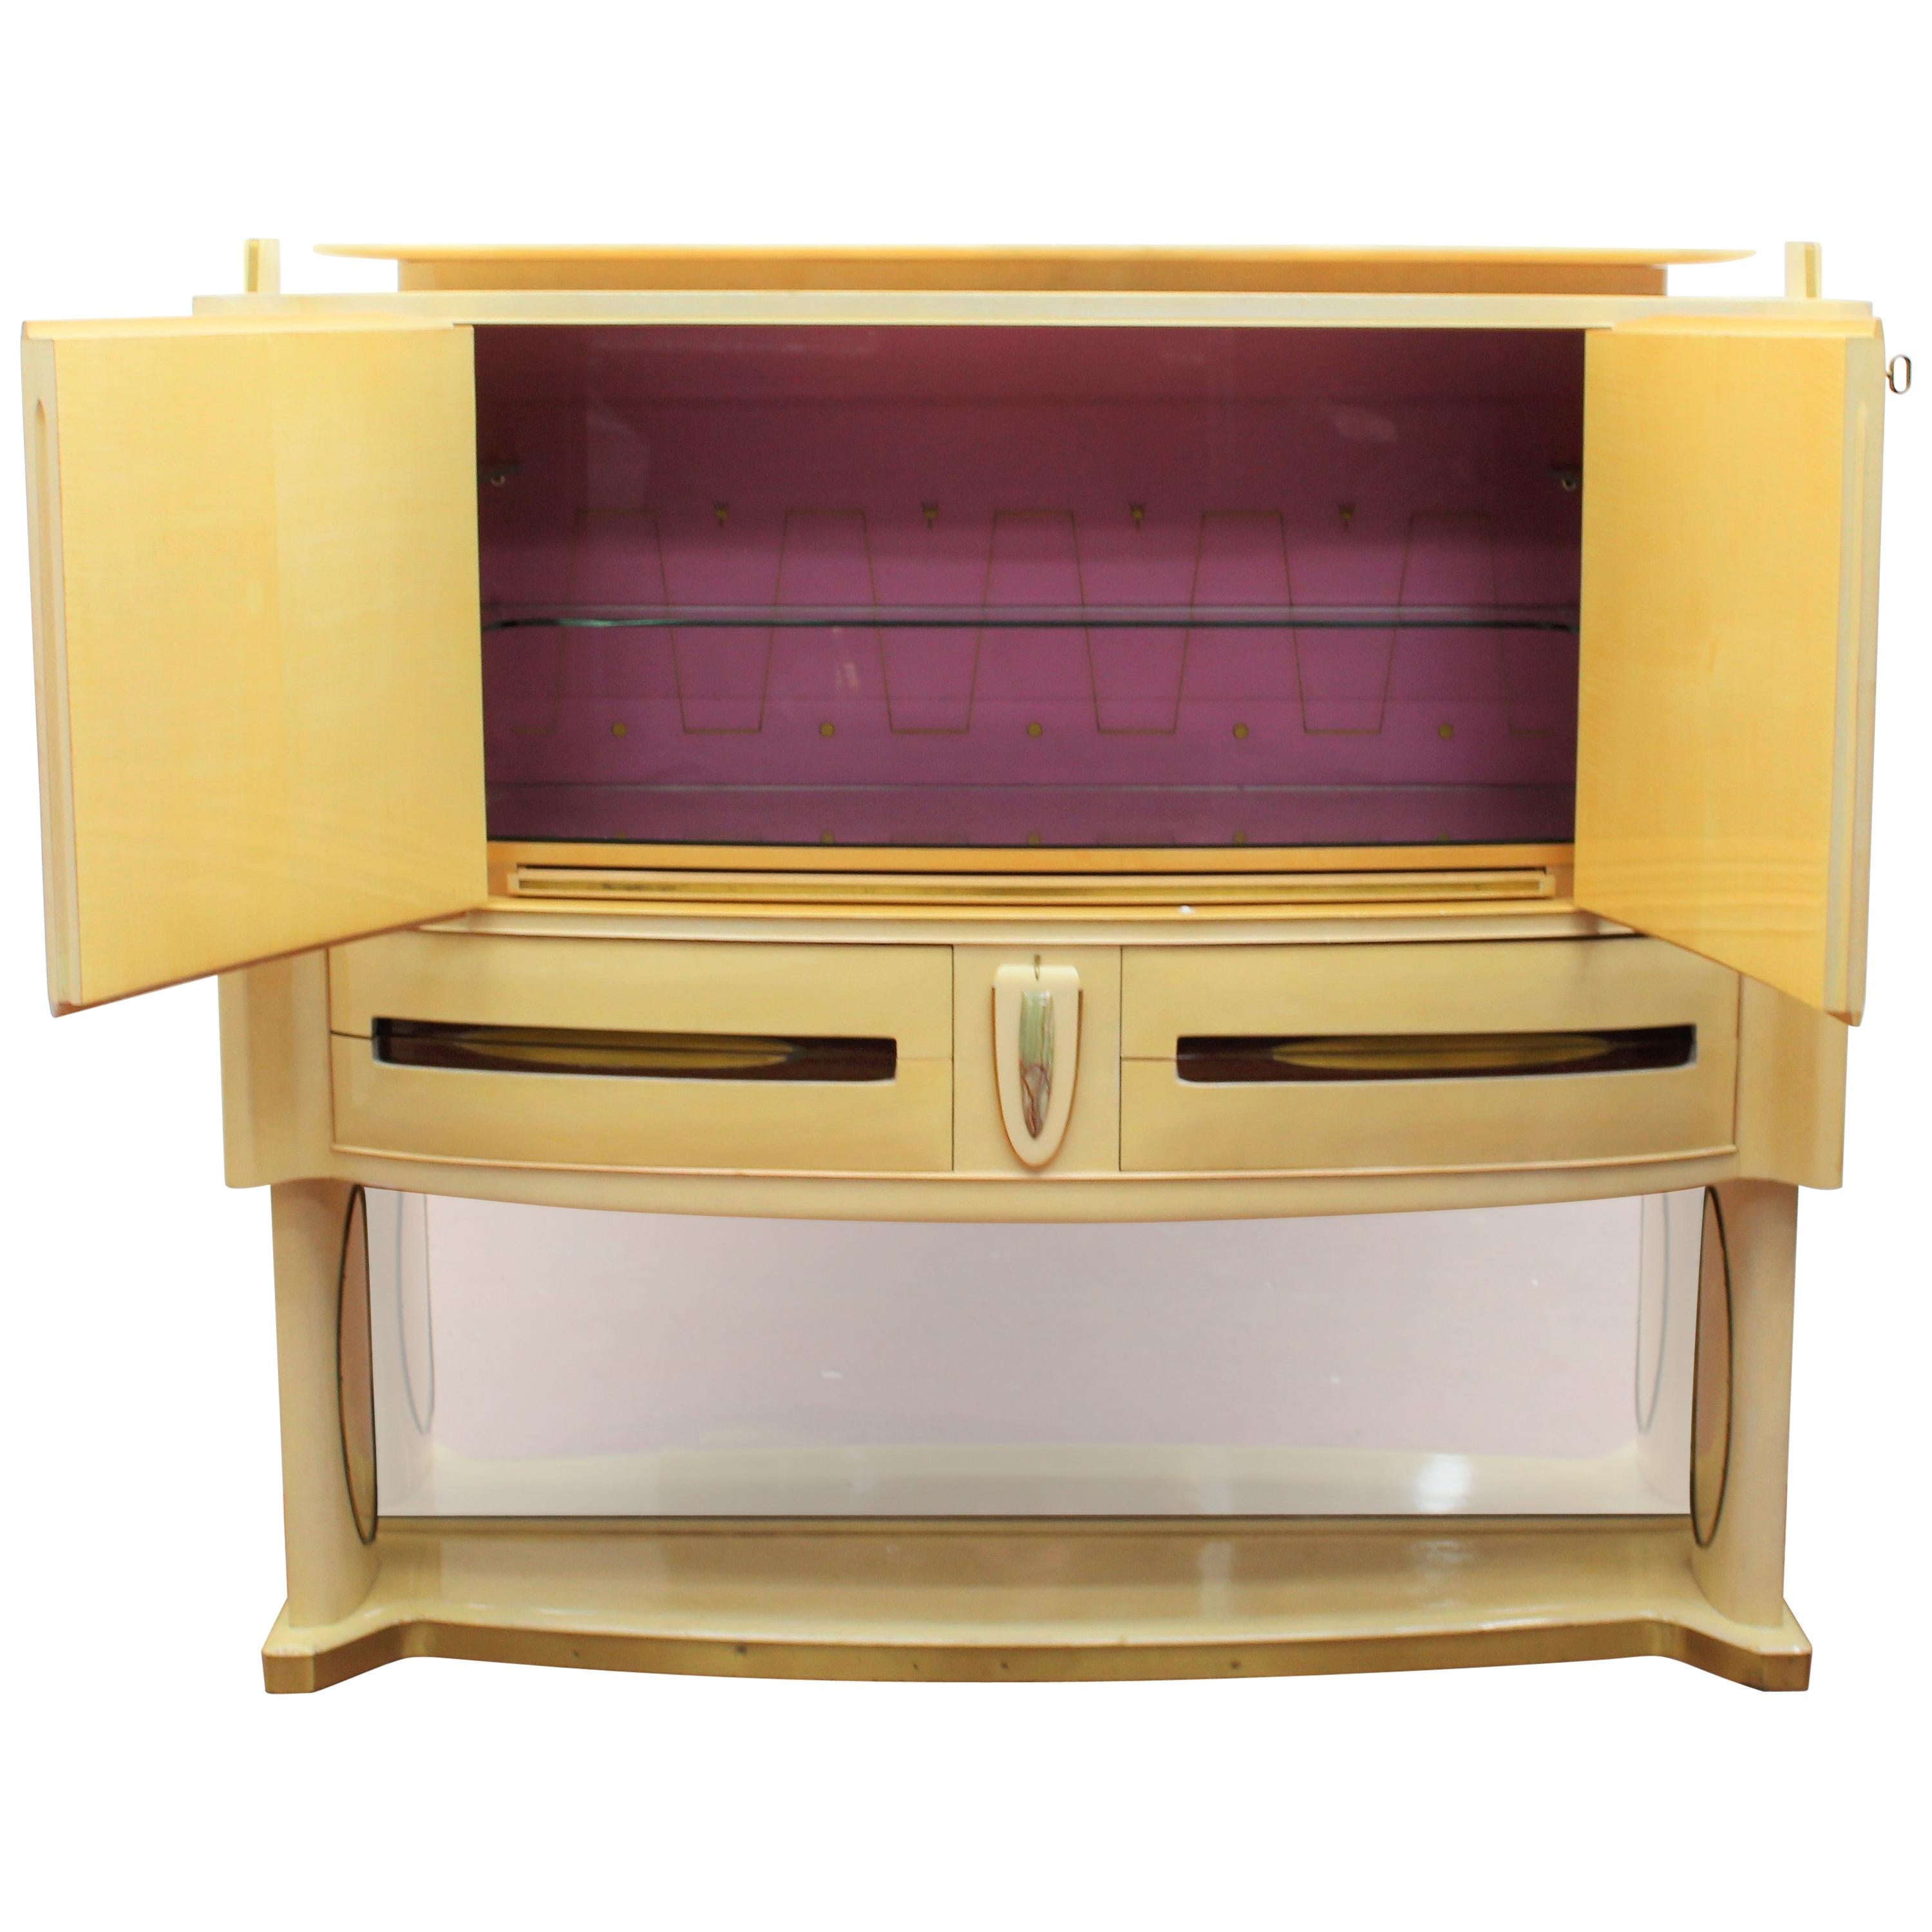 This original bar cabinet is in good condition, and is one of Vittorio Dassi's masterpieces with inlays by Luigi Scremin in the style typical of 20th century Italian artists.
It is entirely finished in parchment, when opening the two doors,